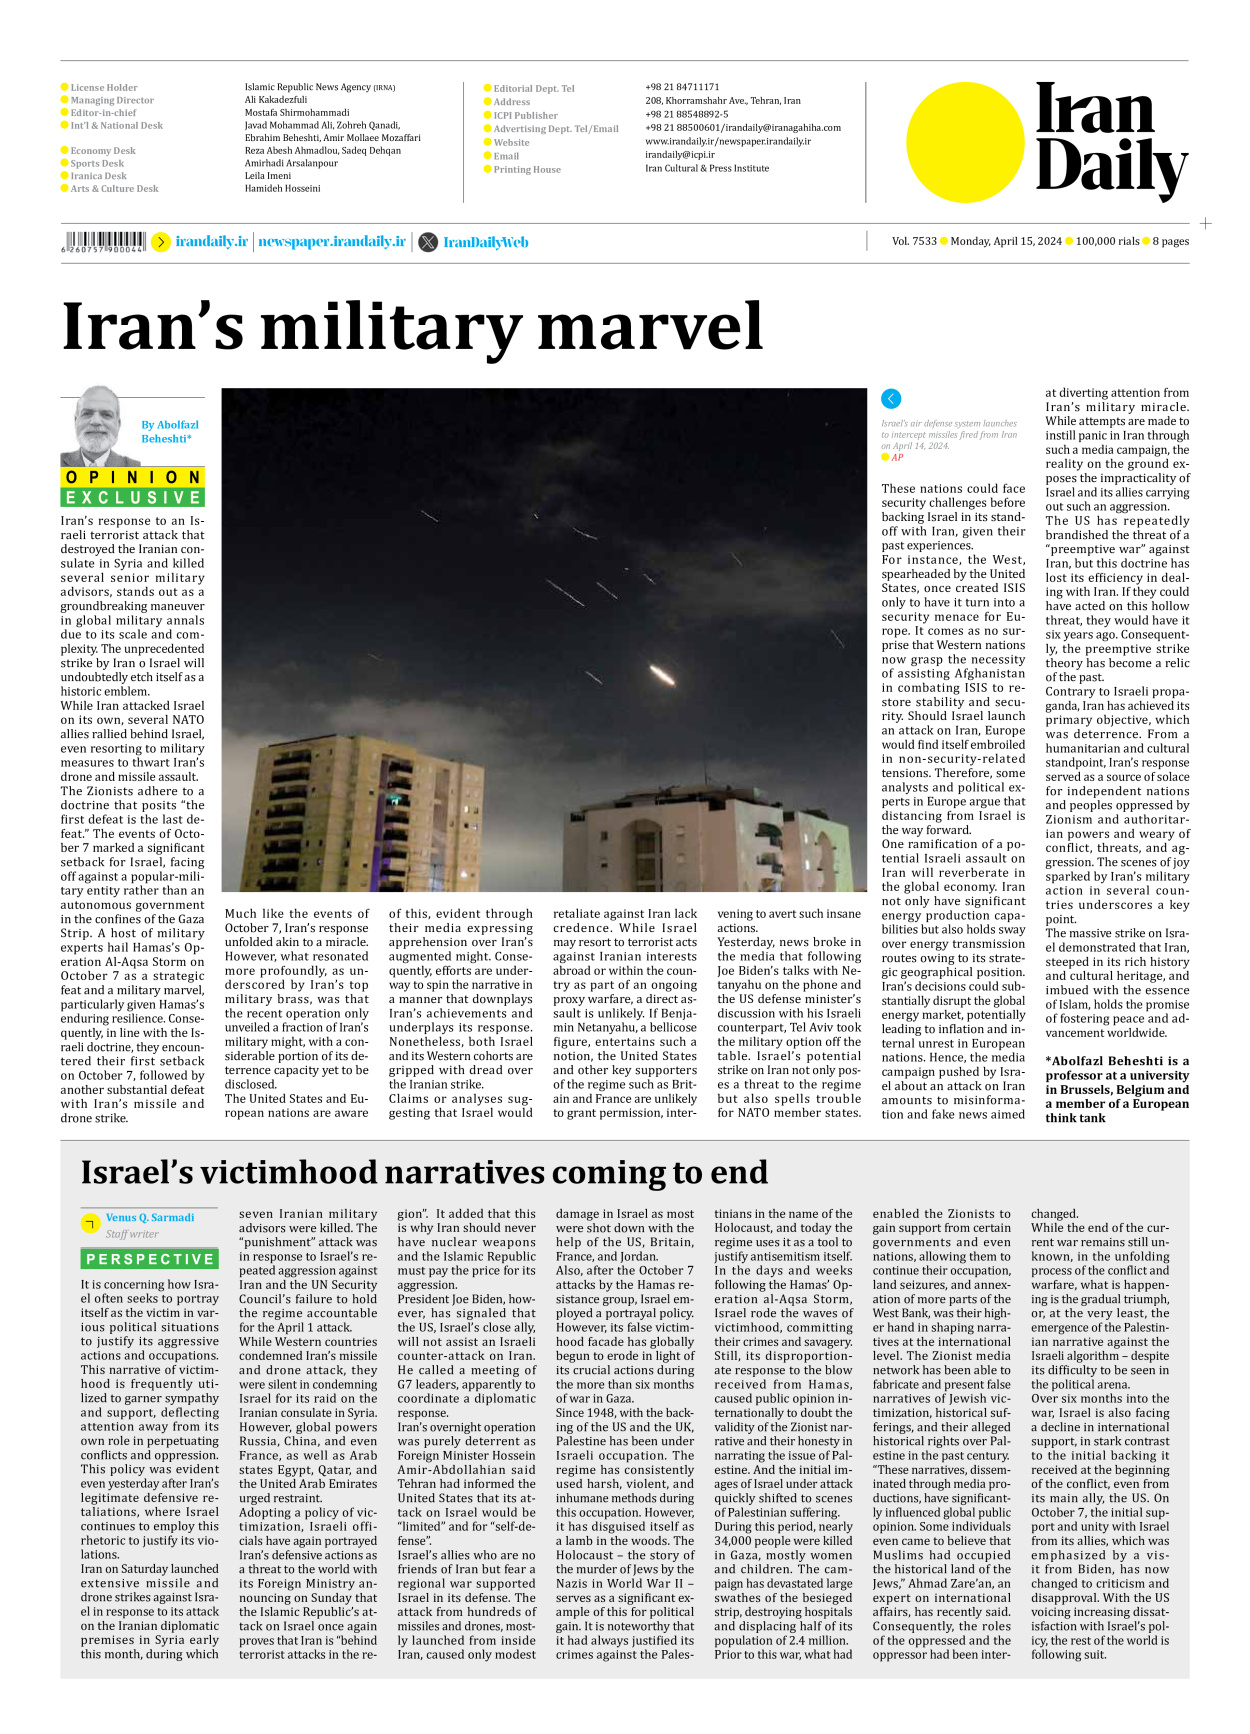 Iran Daily - Number Seven Thousand Five Hundred and Thirty Three - 15 April 2024 - Page 8